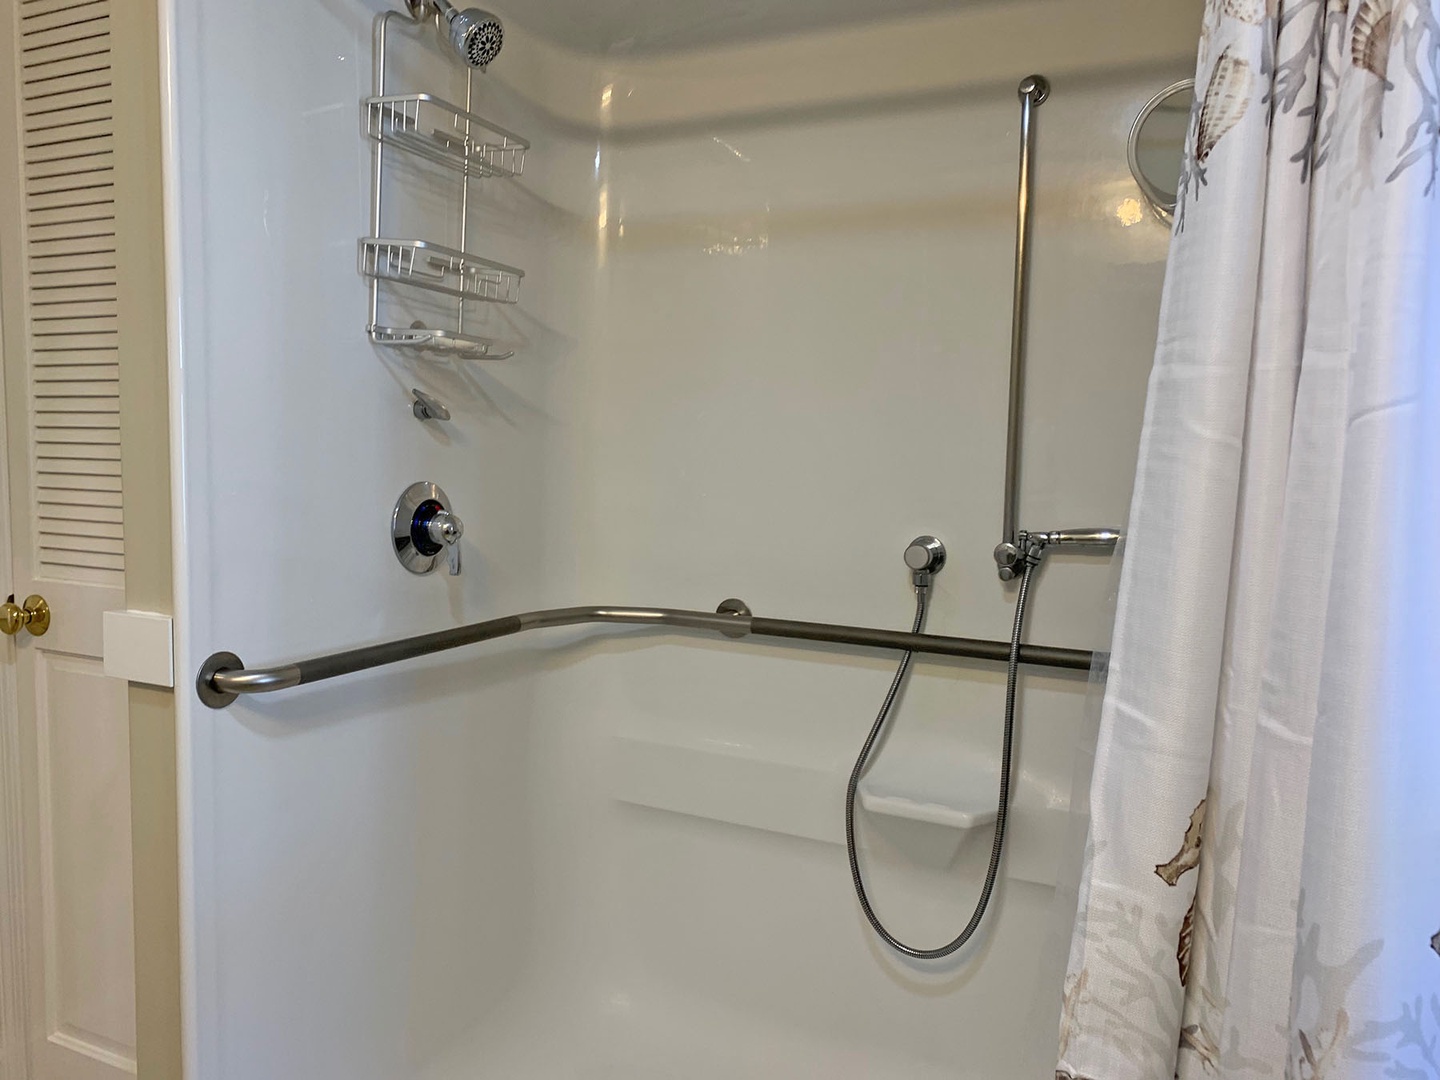 The large walk-in shower has grab bars and a seat for accessibility.